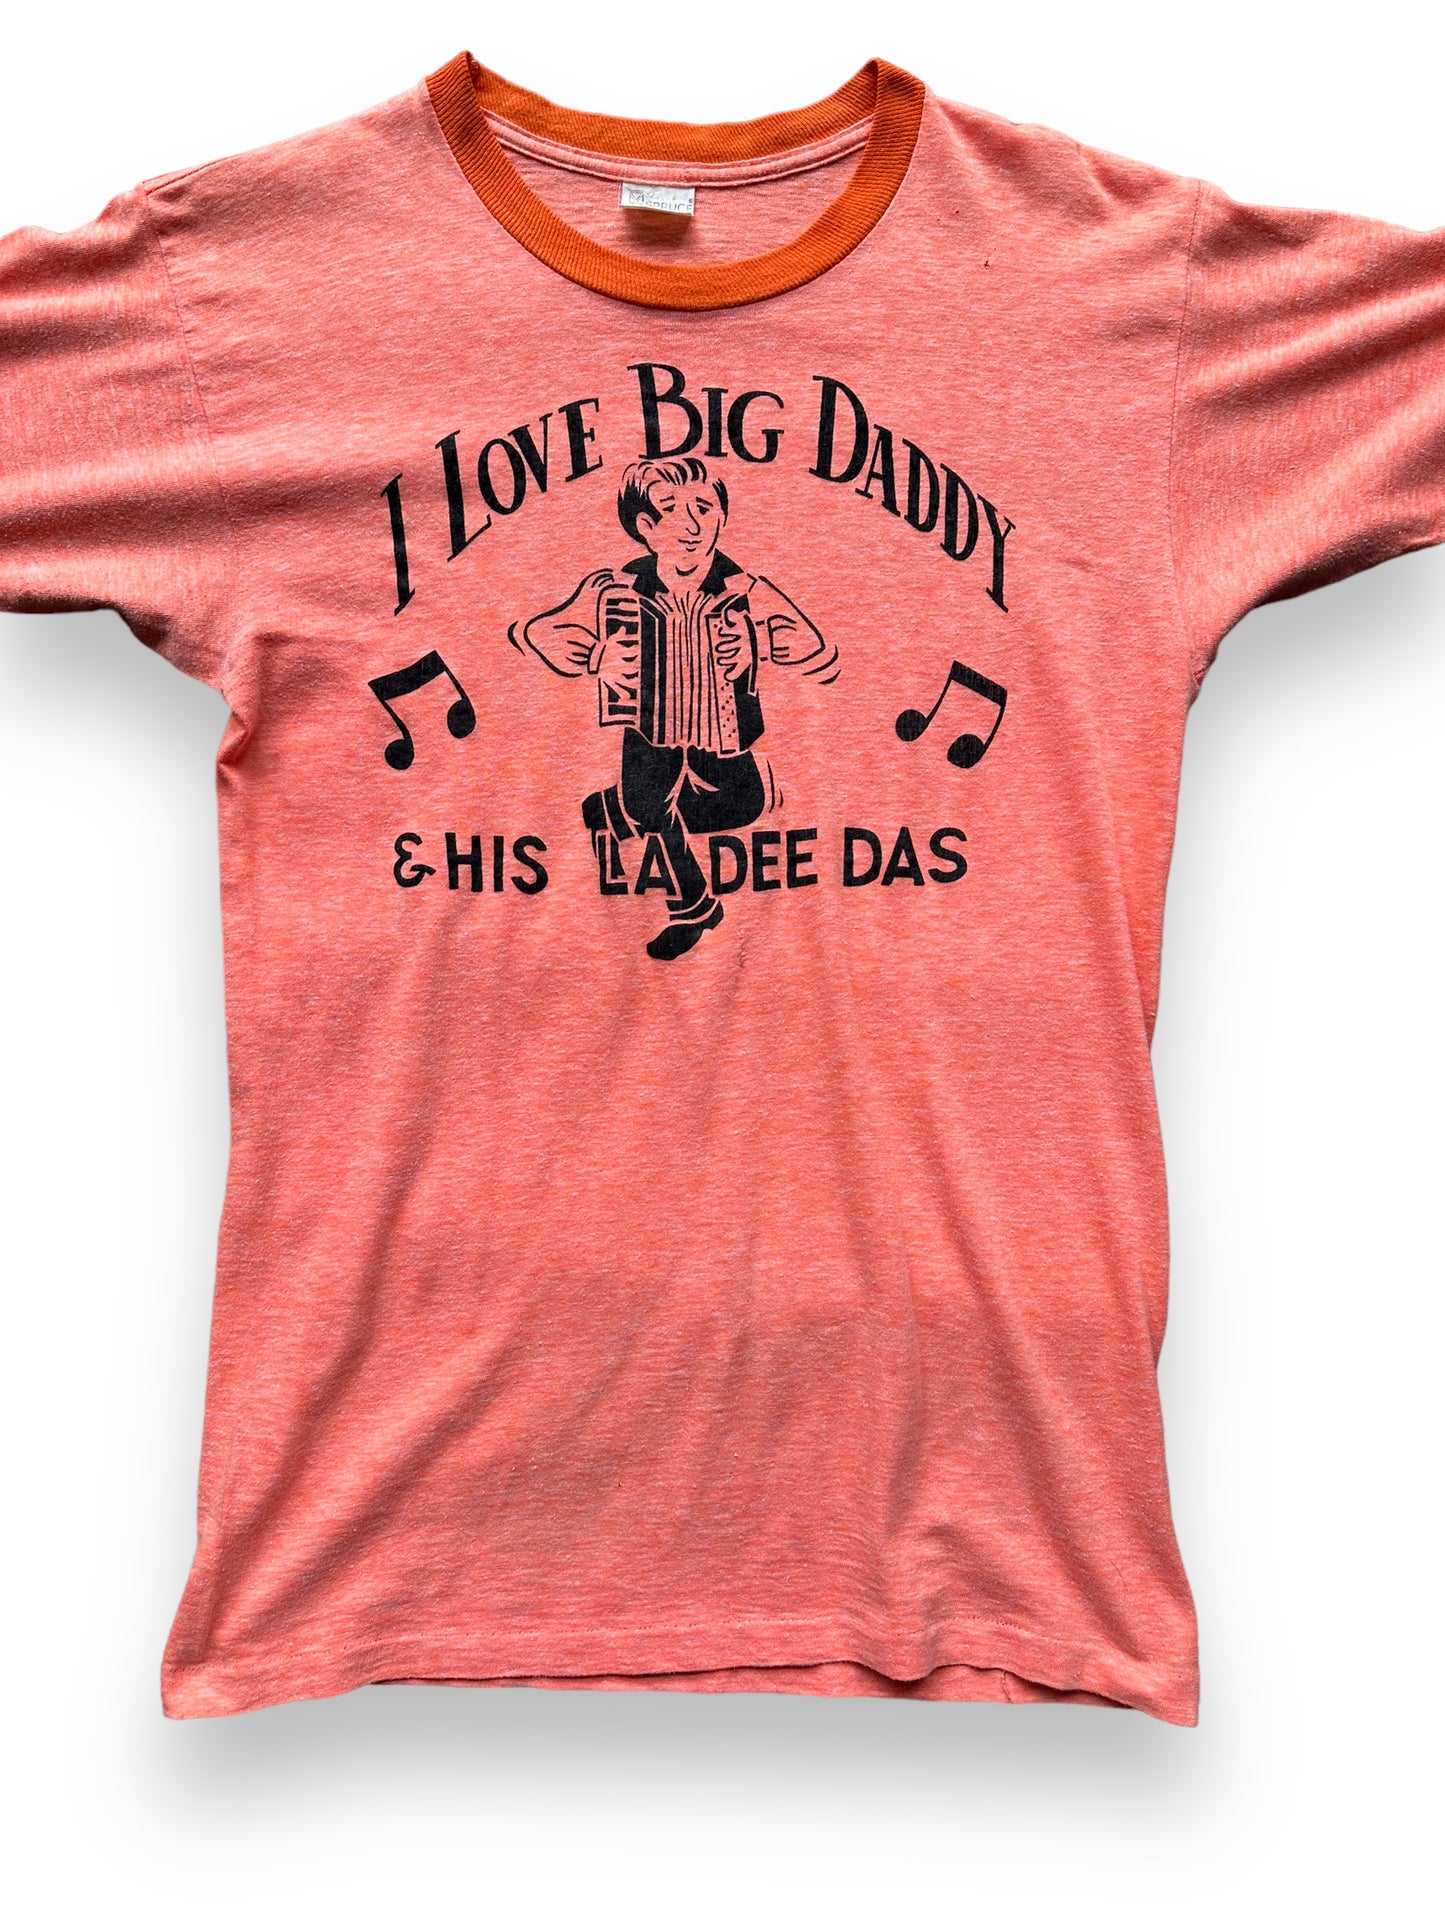 Front Detail on Vintage I Love Big Daddy Tee SZ M | Vintage Accordion T-Shirts Seattle | Barn Owl Vintage Tees Seattle